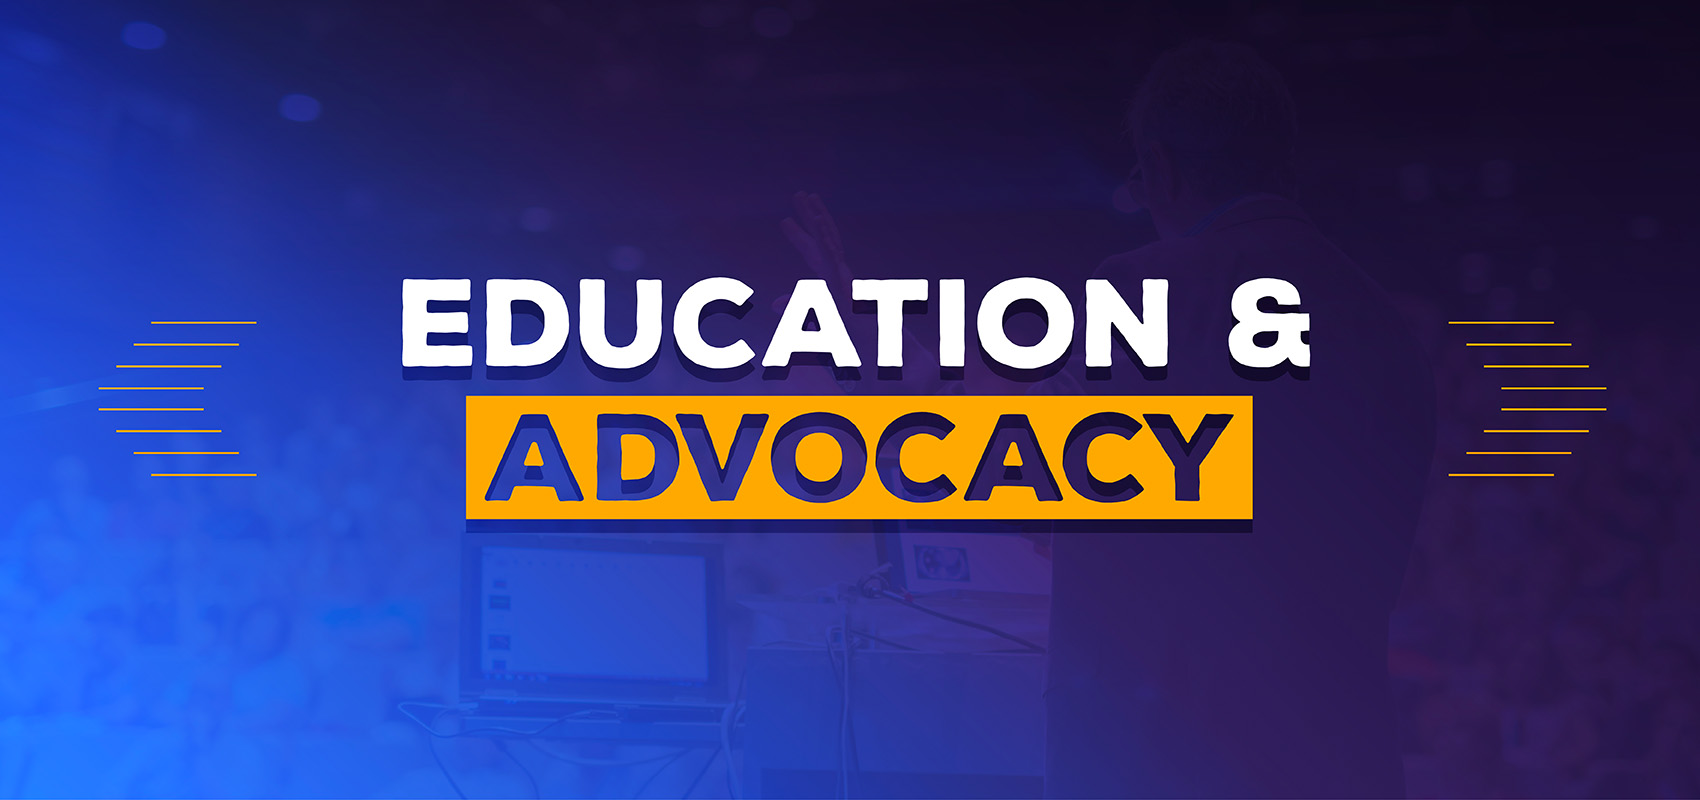 Education and Advocacy Box